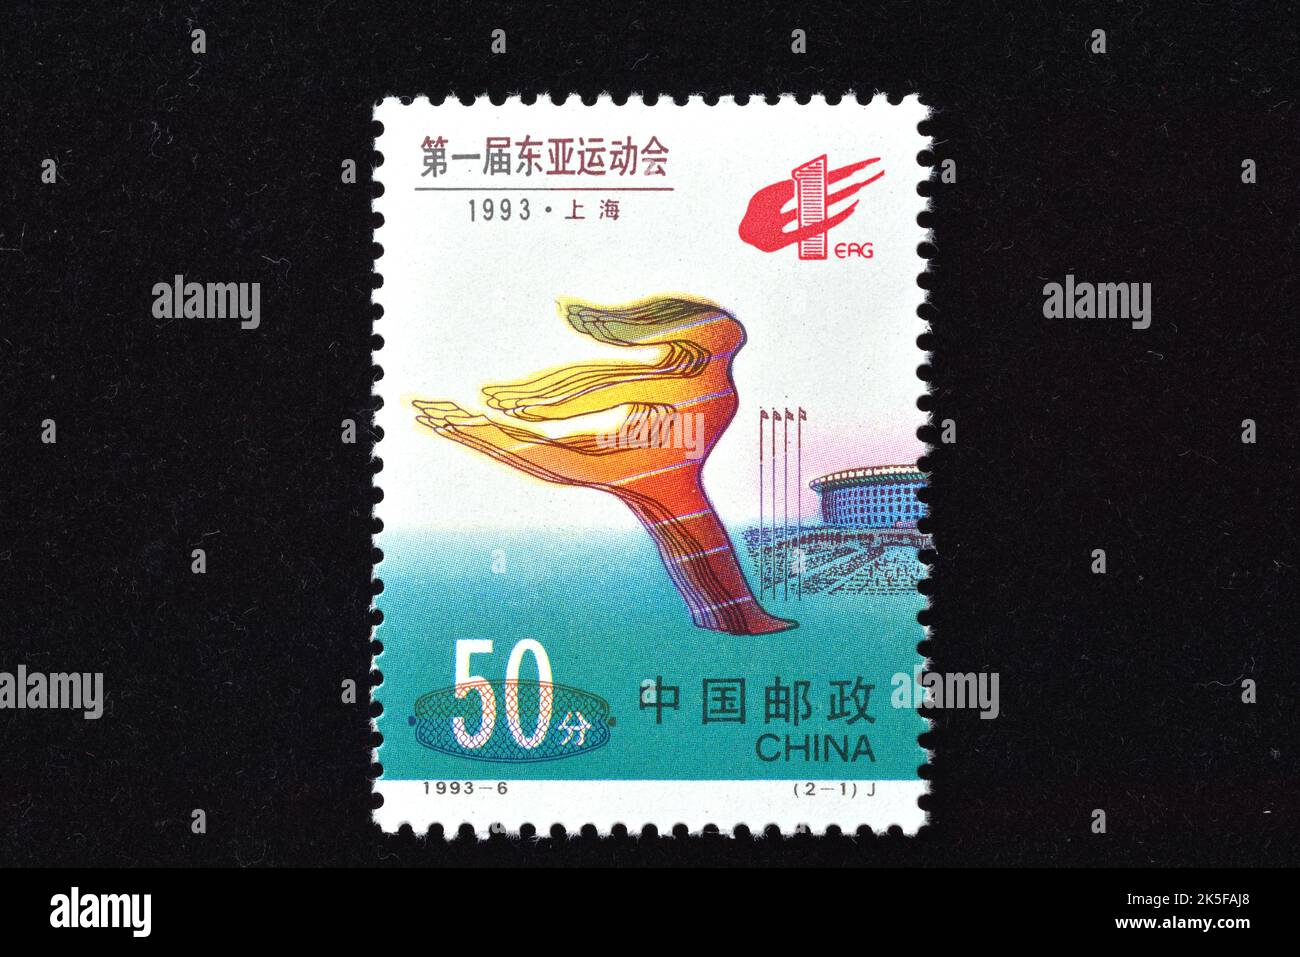 CHINA - CIRCA 1993: A stamp printed in China shows 1993-6, Scott 2443 The First East Asian Games  Athlete  Mascot, circa 1993 Stock Photo